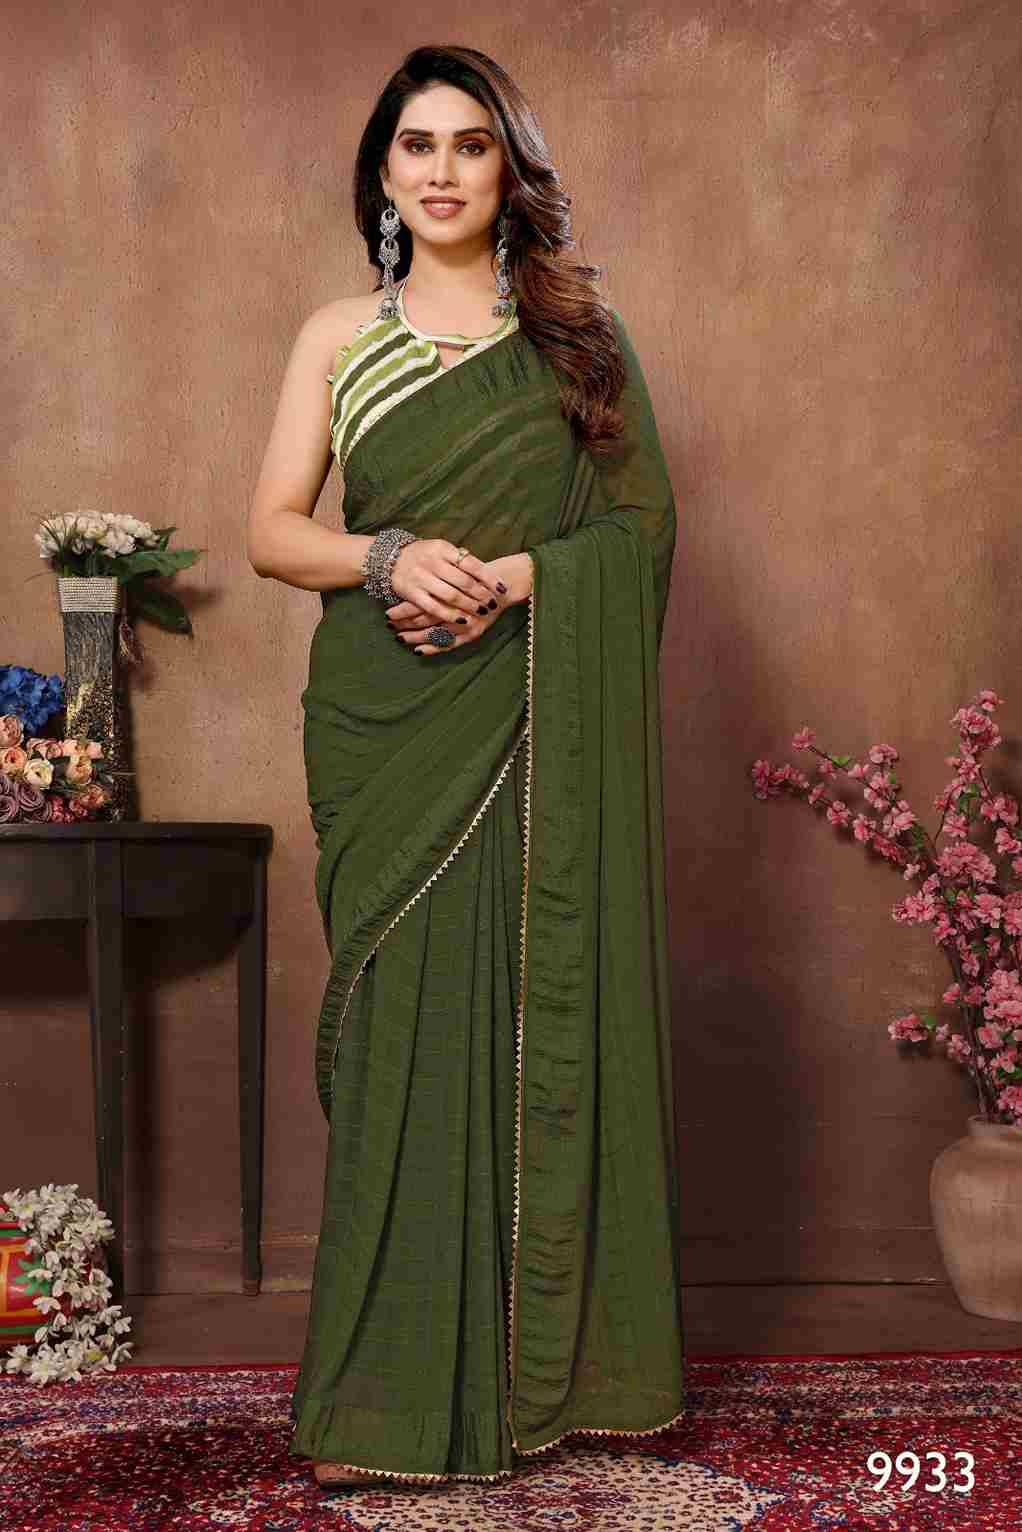 Satrangi Vol-3 By Fashid Wholesale 9928 To 9935 Series Indian Traditional Wear Collection Beautiful Stylish Fancy Colorful Party Wear & Occasional Wear Georgette Sarees At Wholesale Price